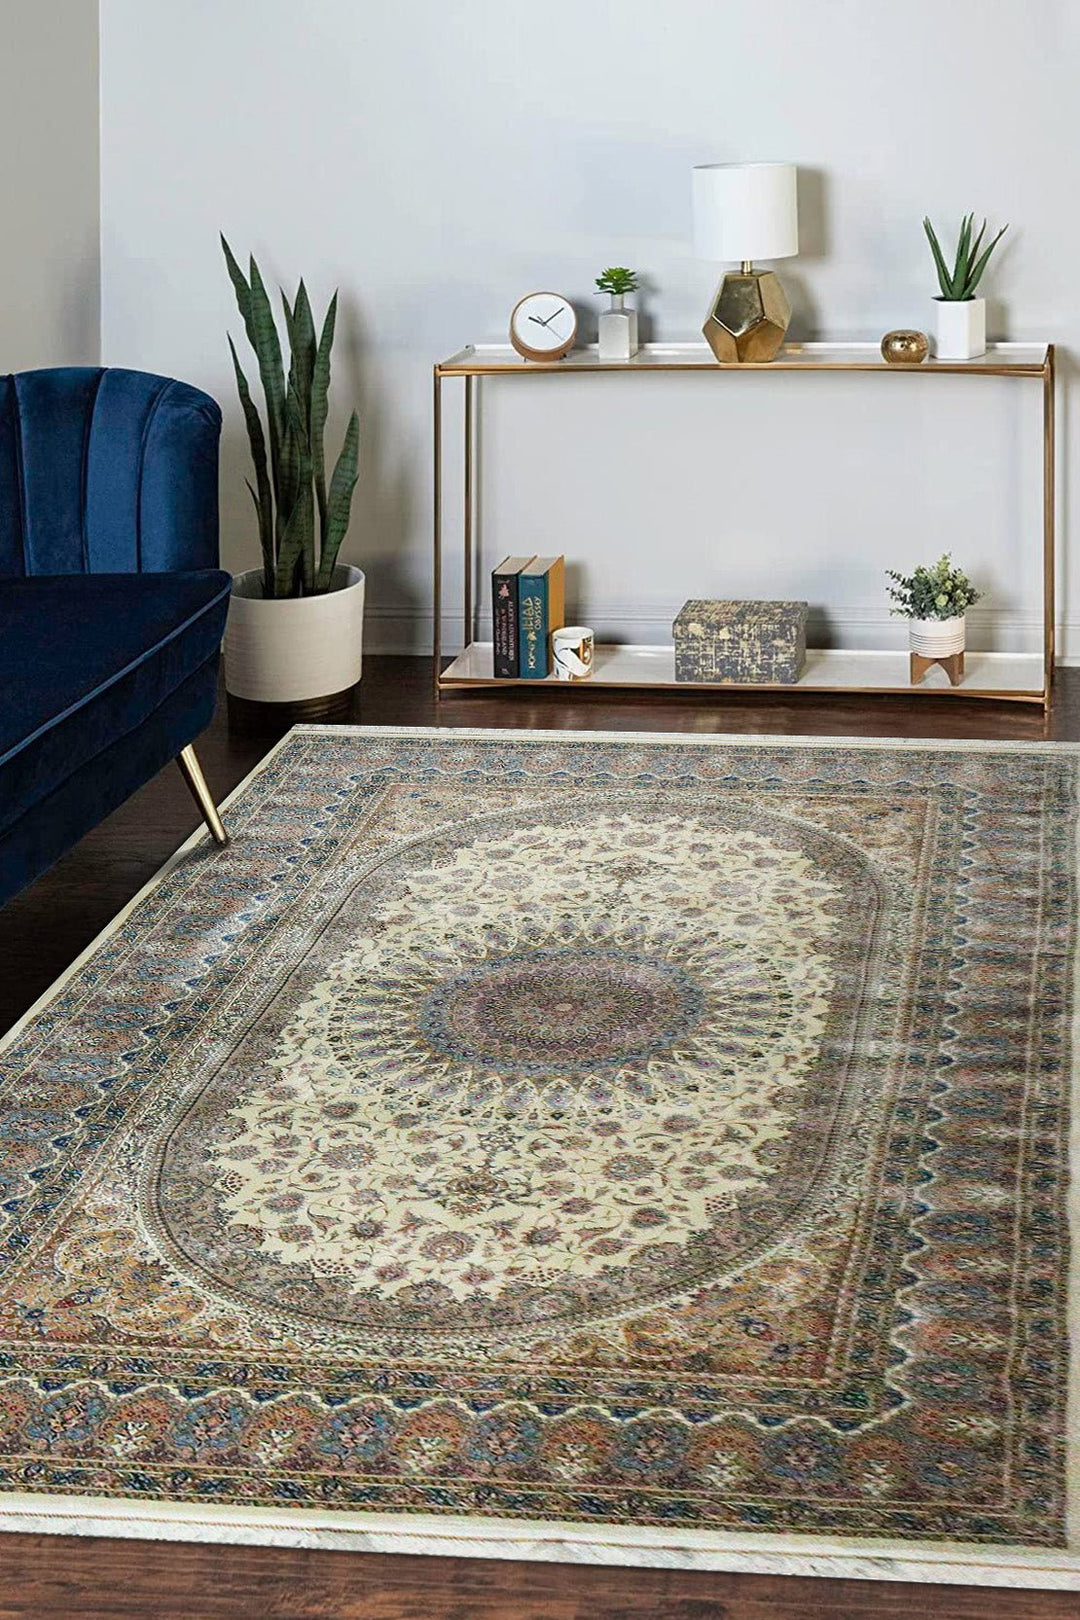 Iranian Premium Quality Silk 1500 Rug - 6.5 x 9.8 FT - Beige - Resilient Construction for Long-Lasting Use - V Surfaces